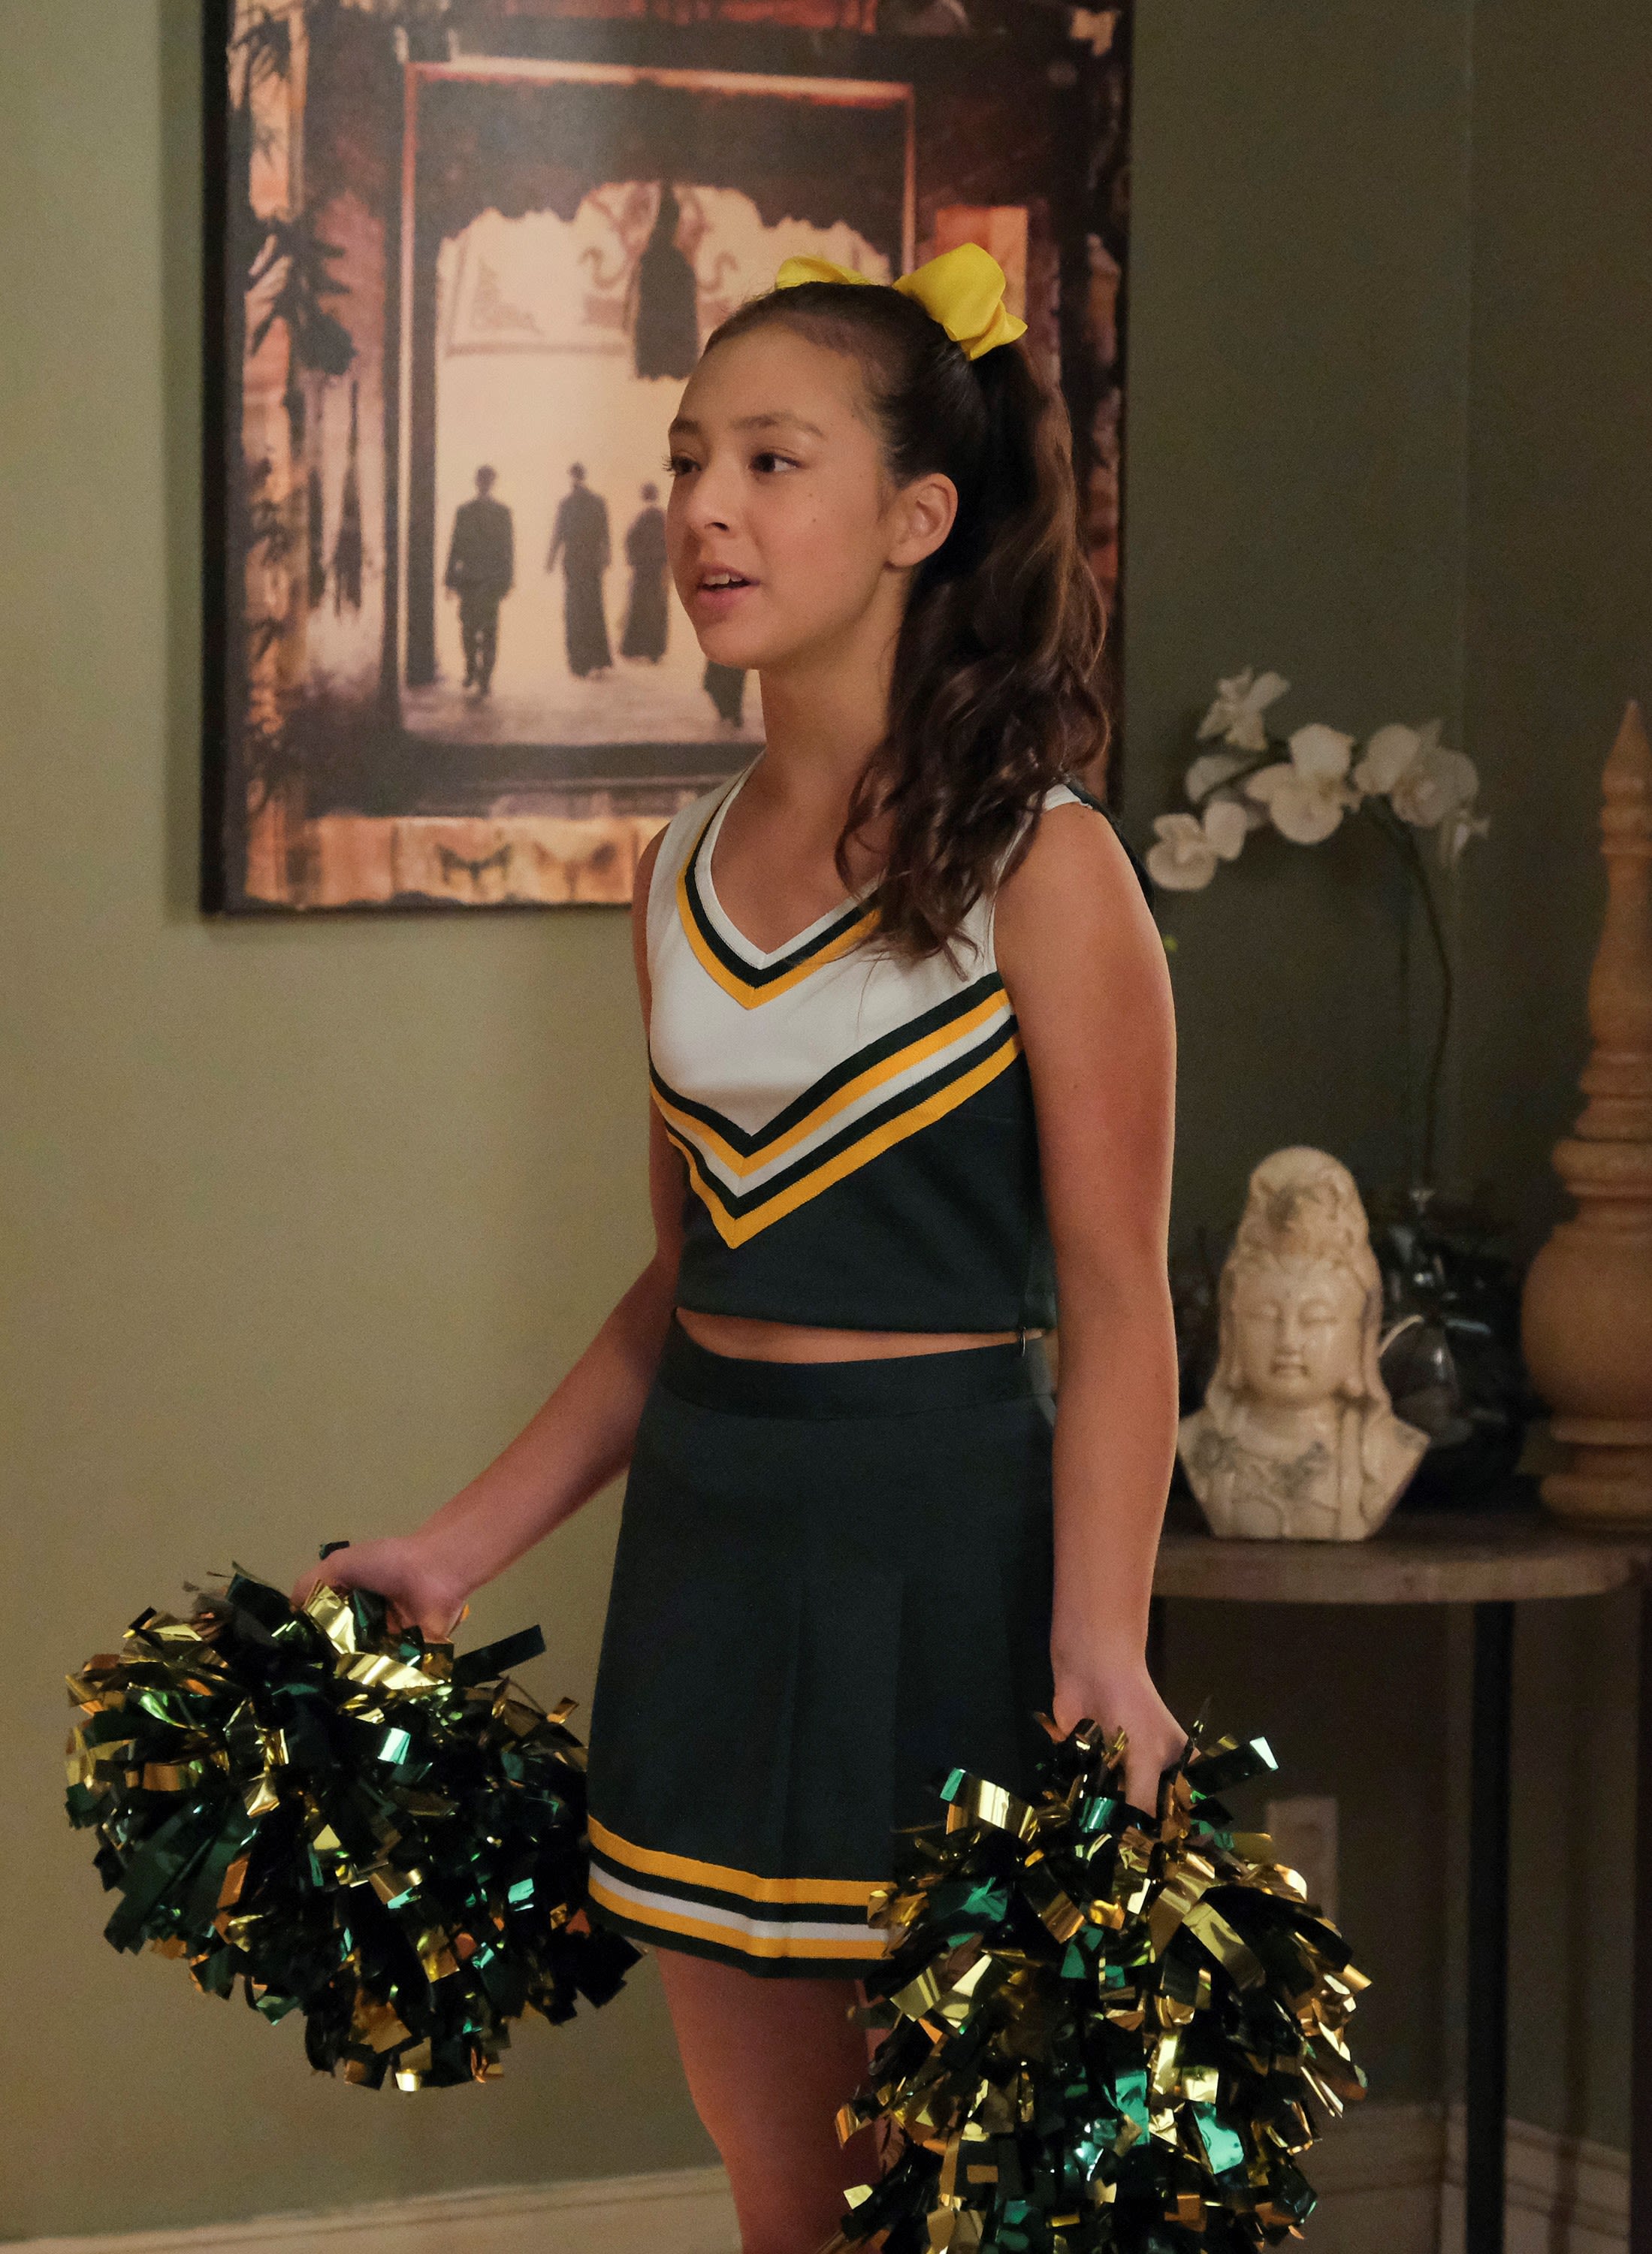 Lily The Cheerleader On And Off Halloween Modern Family Season Images, Photos, Reviews